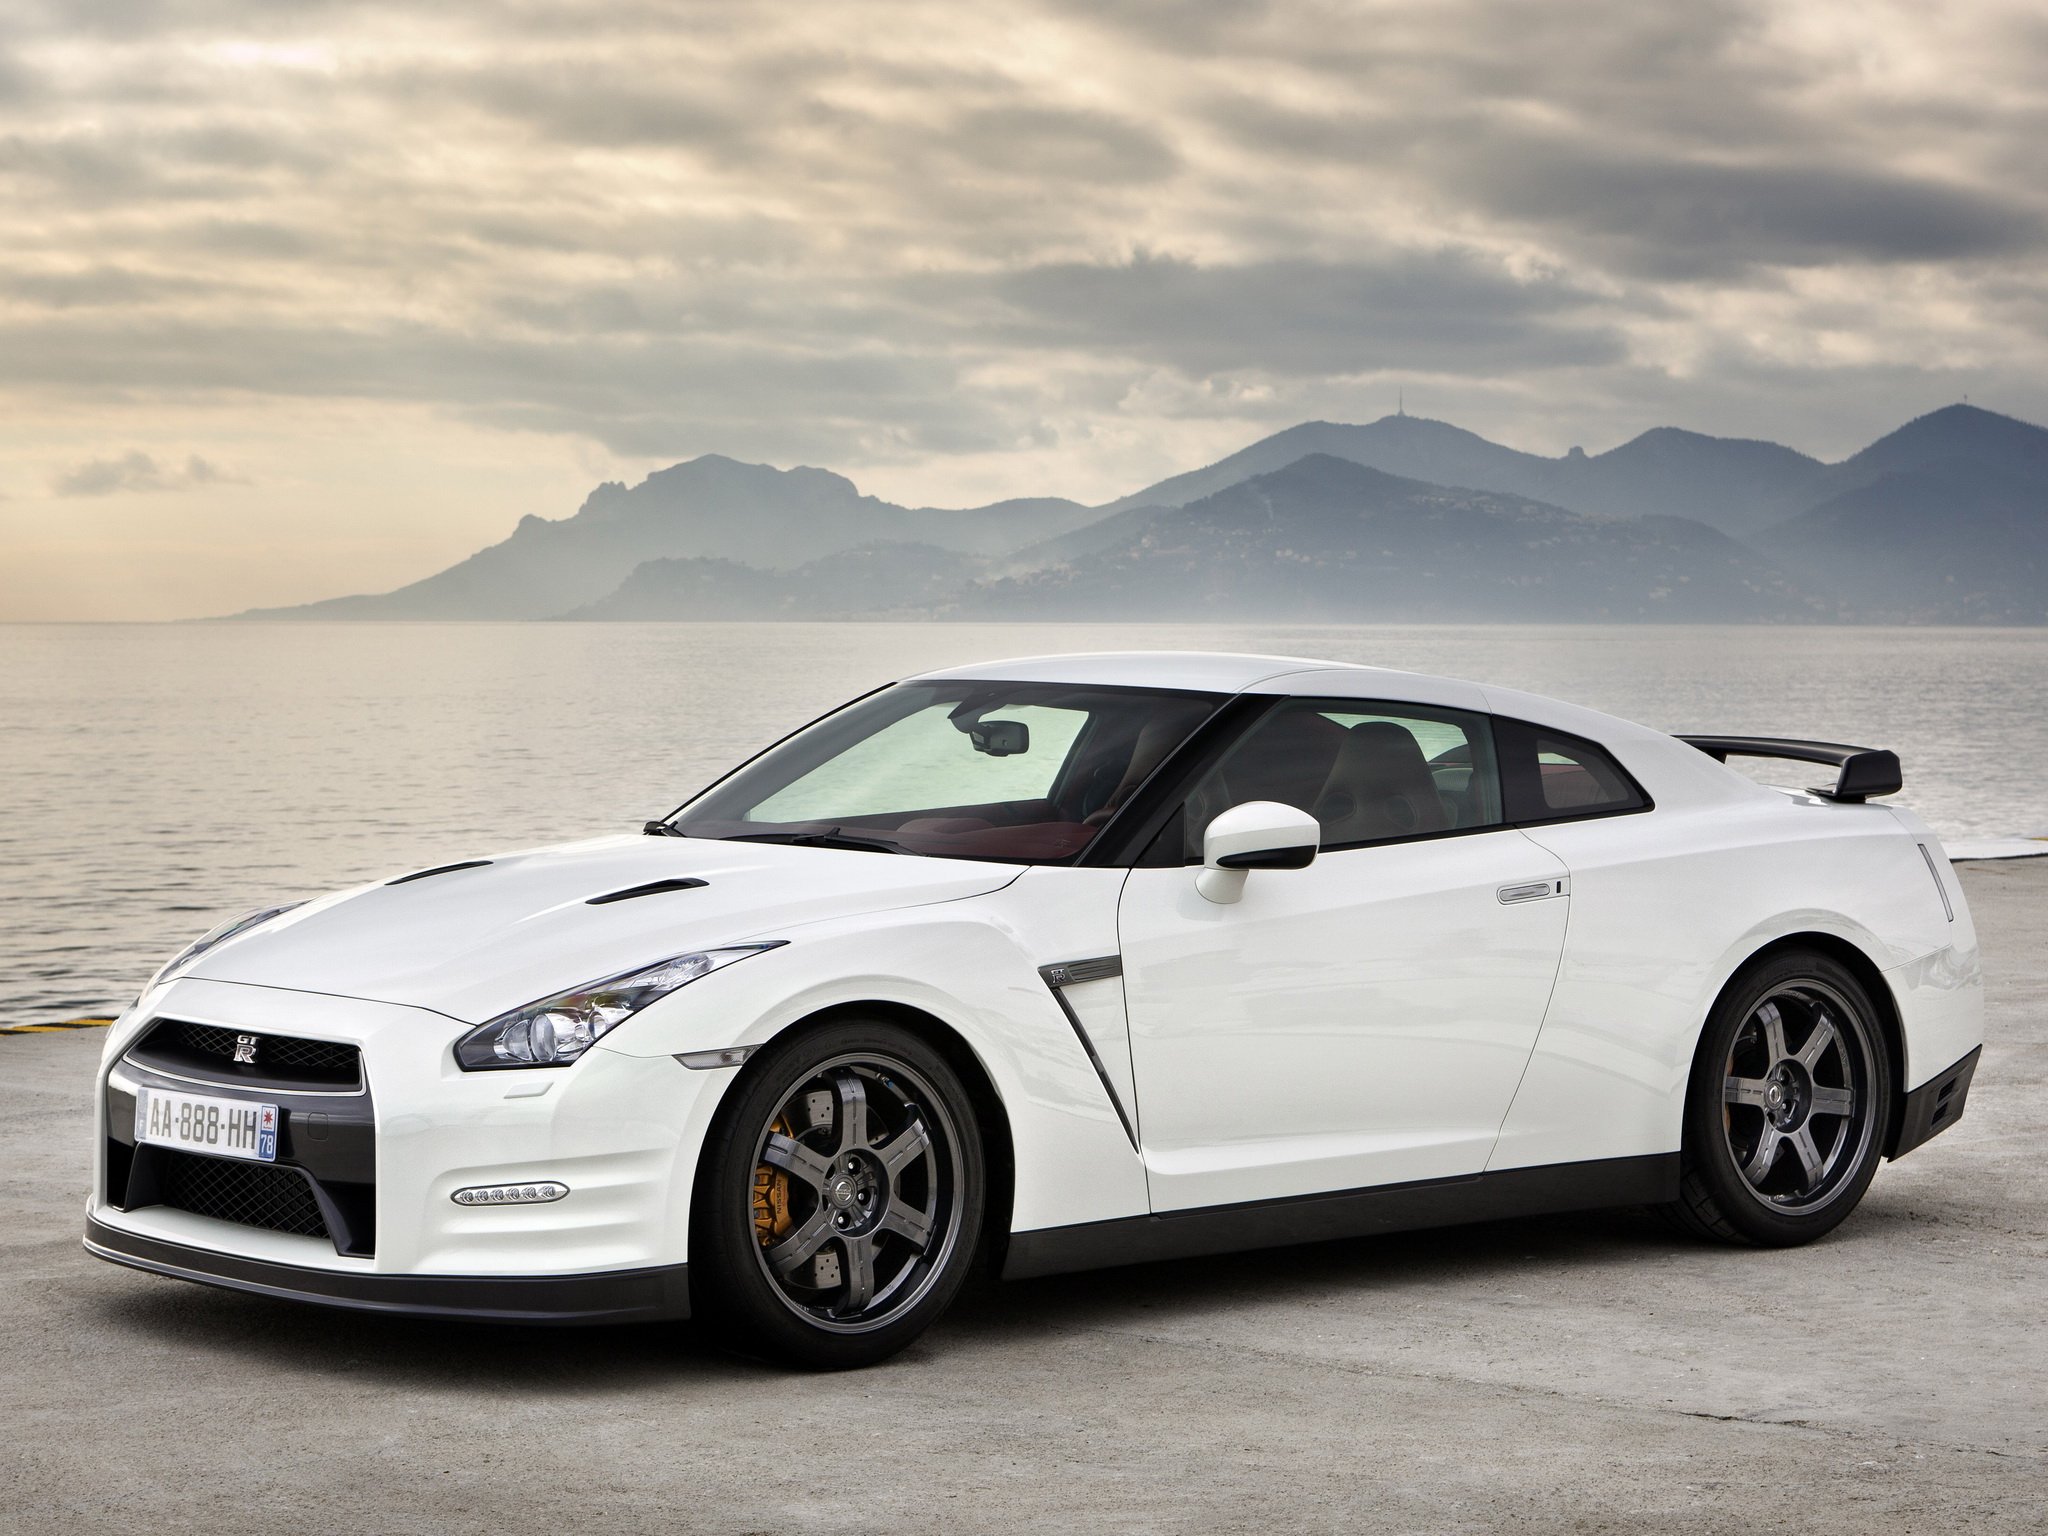 nissan, Gt r, Egoist, R35, Cars, Coupe, 2011 Wallpapers HD